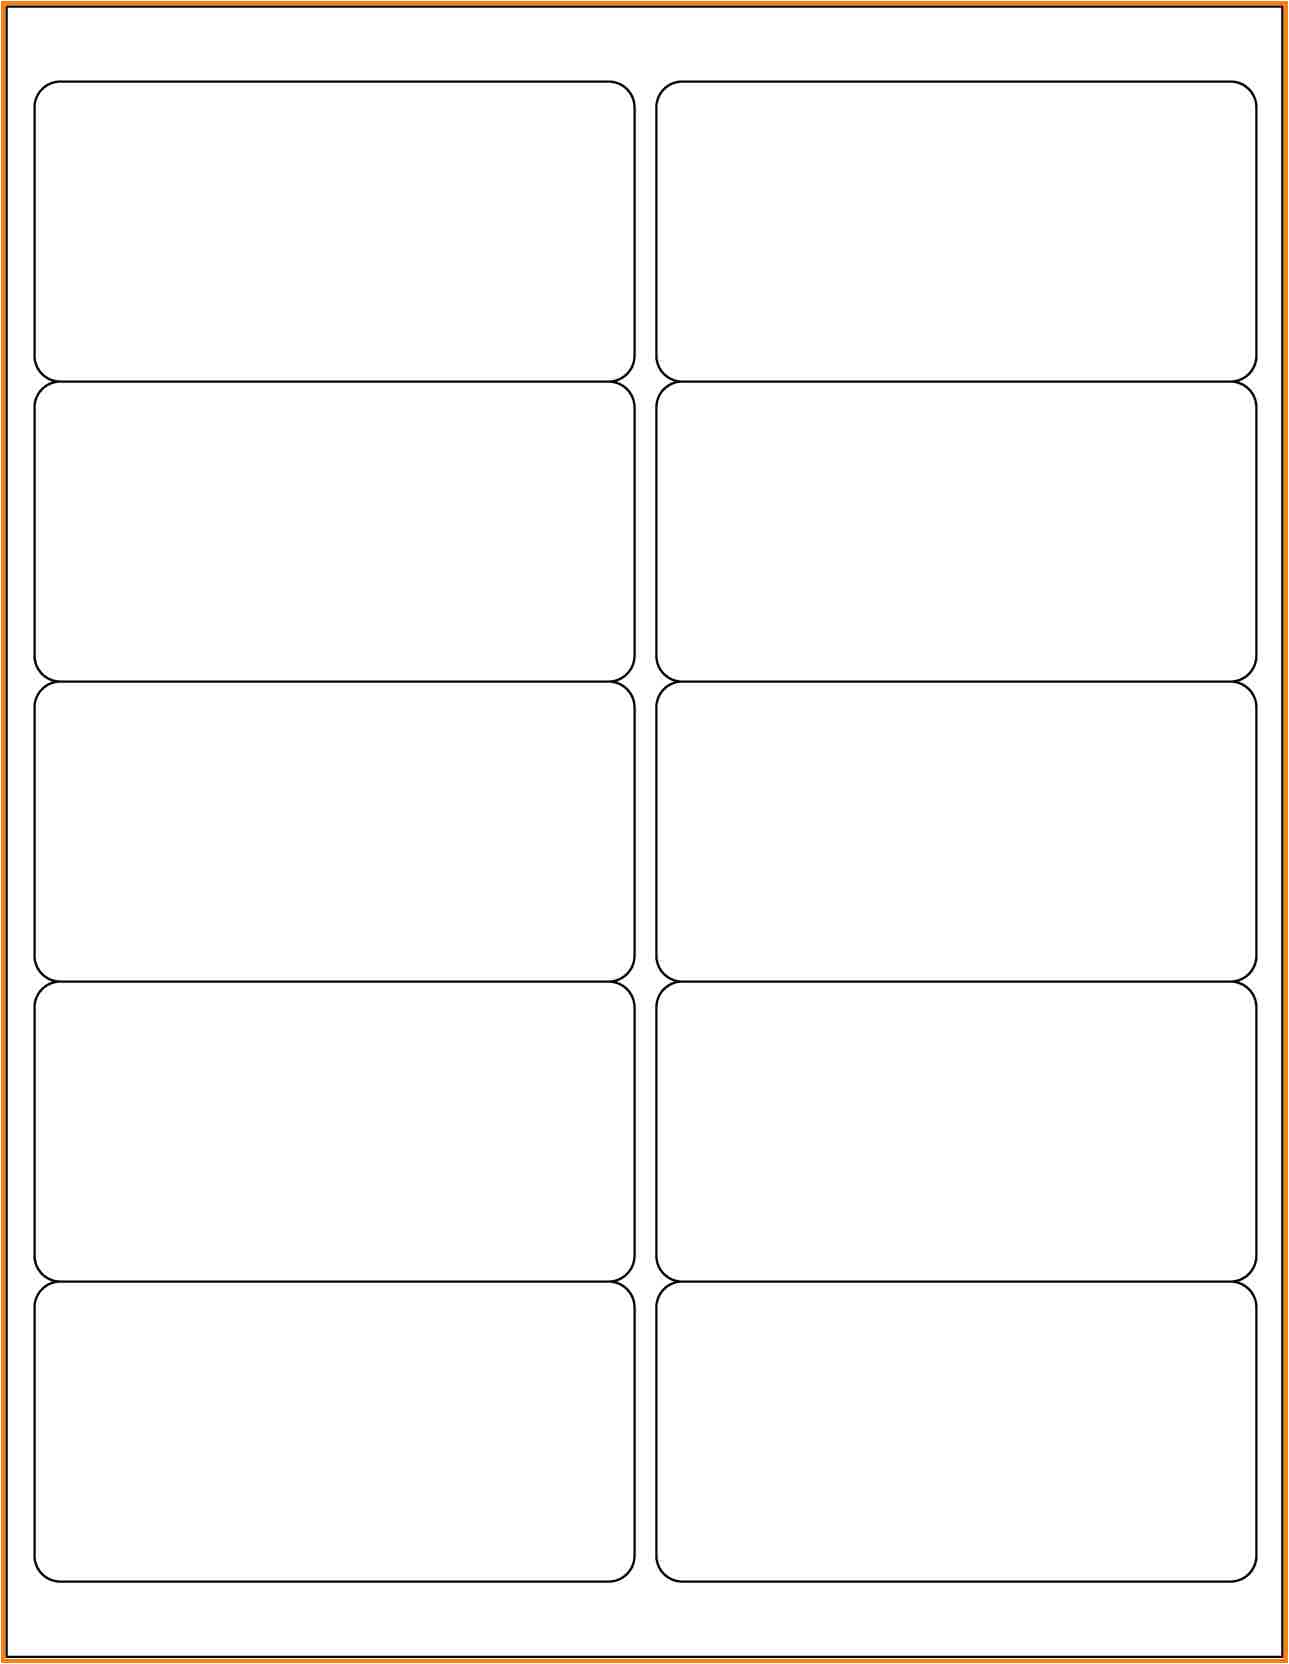 Free Avery Templates 8160 Labels Williamson